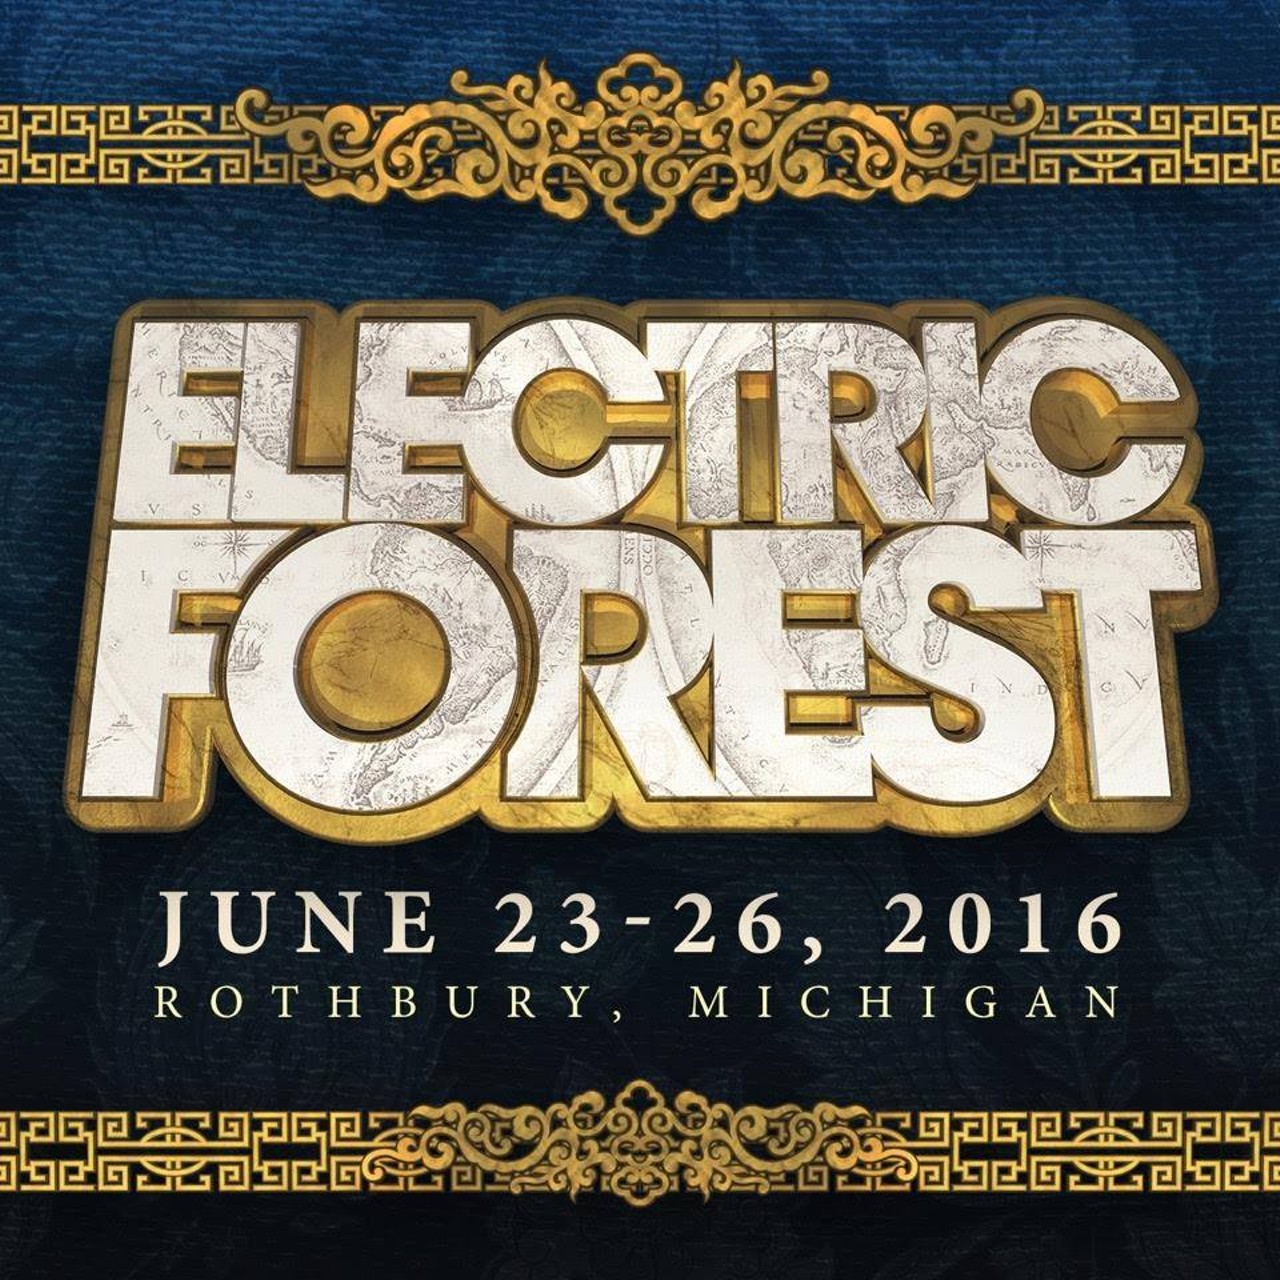 Electric Forest is the best music electronic festival.
Sure if you like paying out the ass for corporate, mainstream fuckery. DEMF (or Movement or whatever) will always be #1. Period.  
Photo via Electric Forest's Facebook